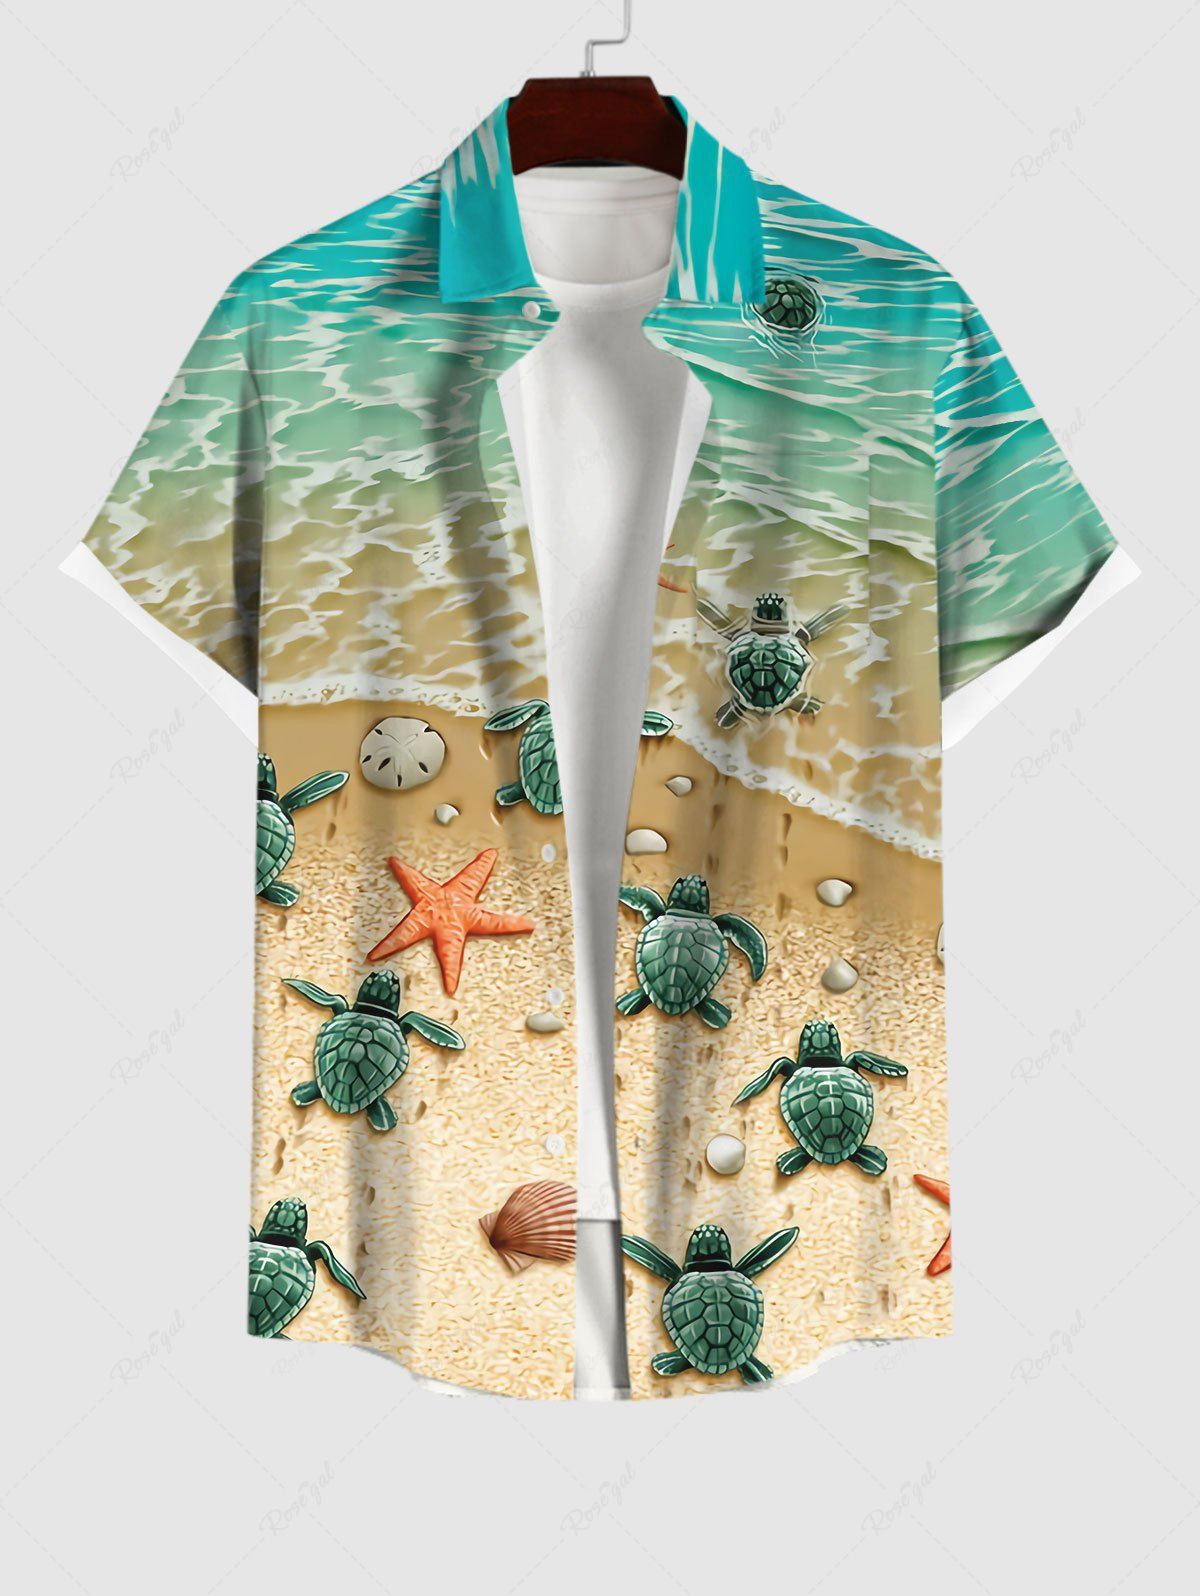 Hawaii Plus Size Sea Creatures Beach Starfish Turtle Shell Print Buttons Pocket Shirt For Men Multi-A 4XL